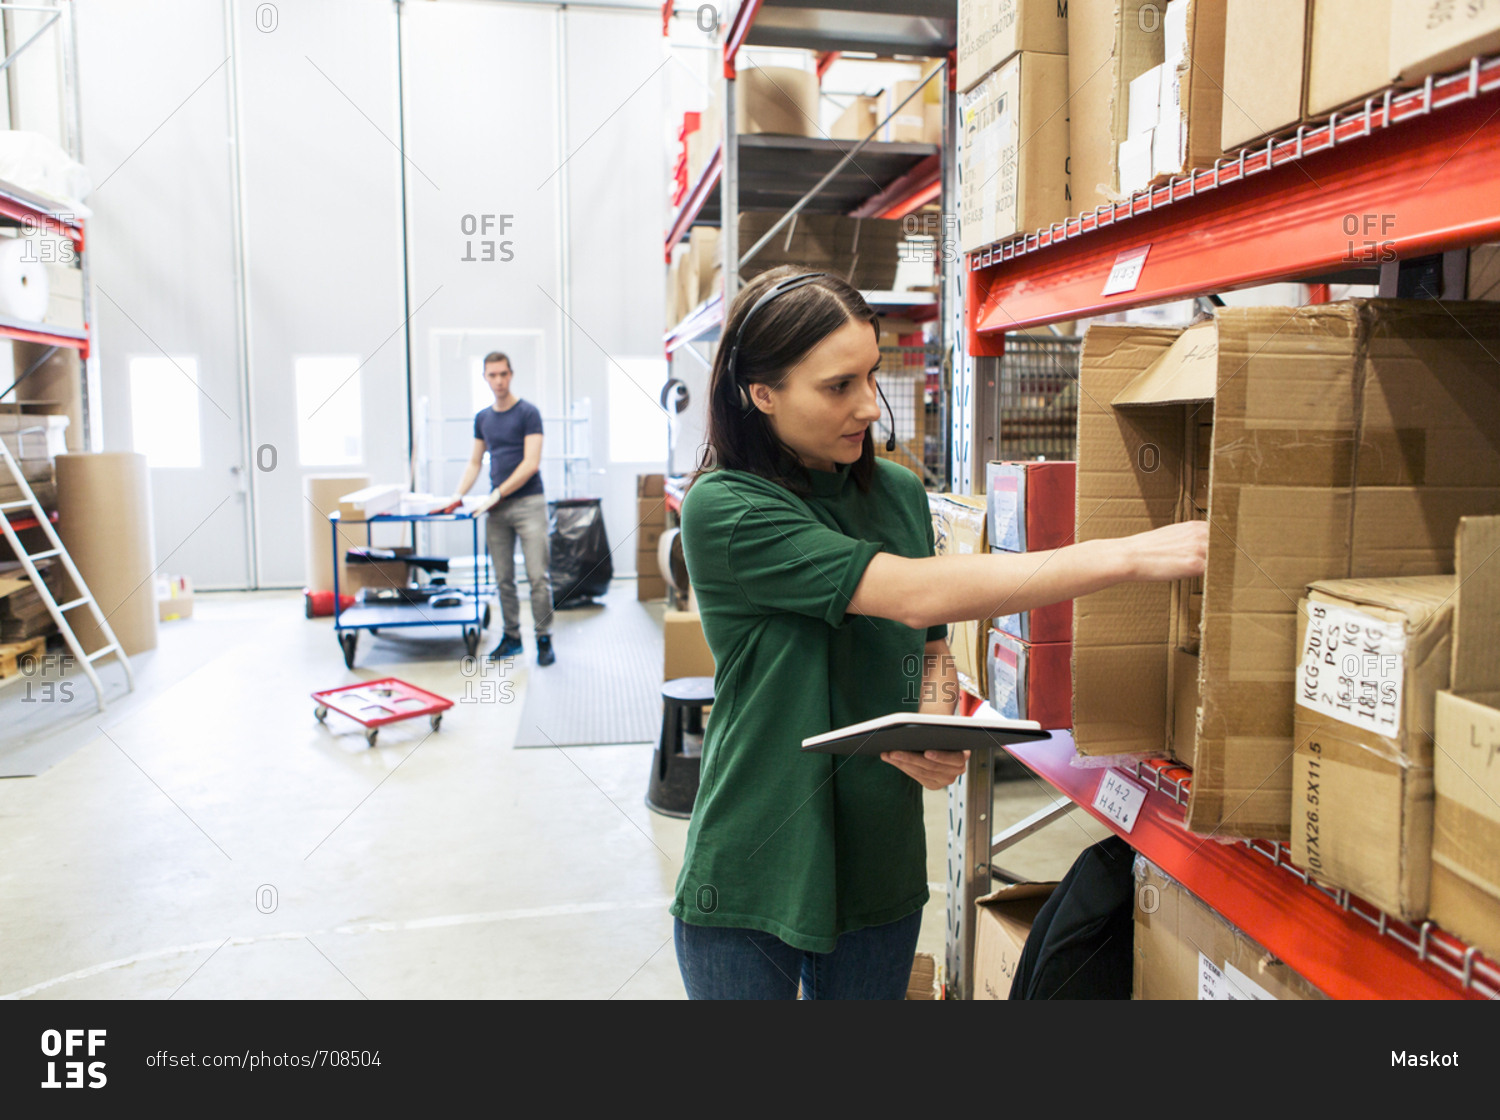 Male and female colleagues examining boxes in industry